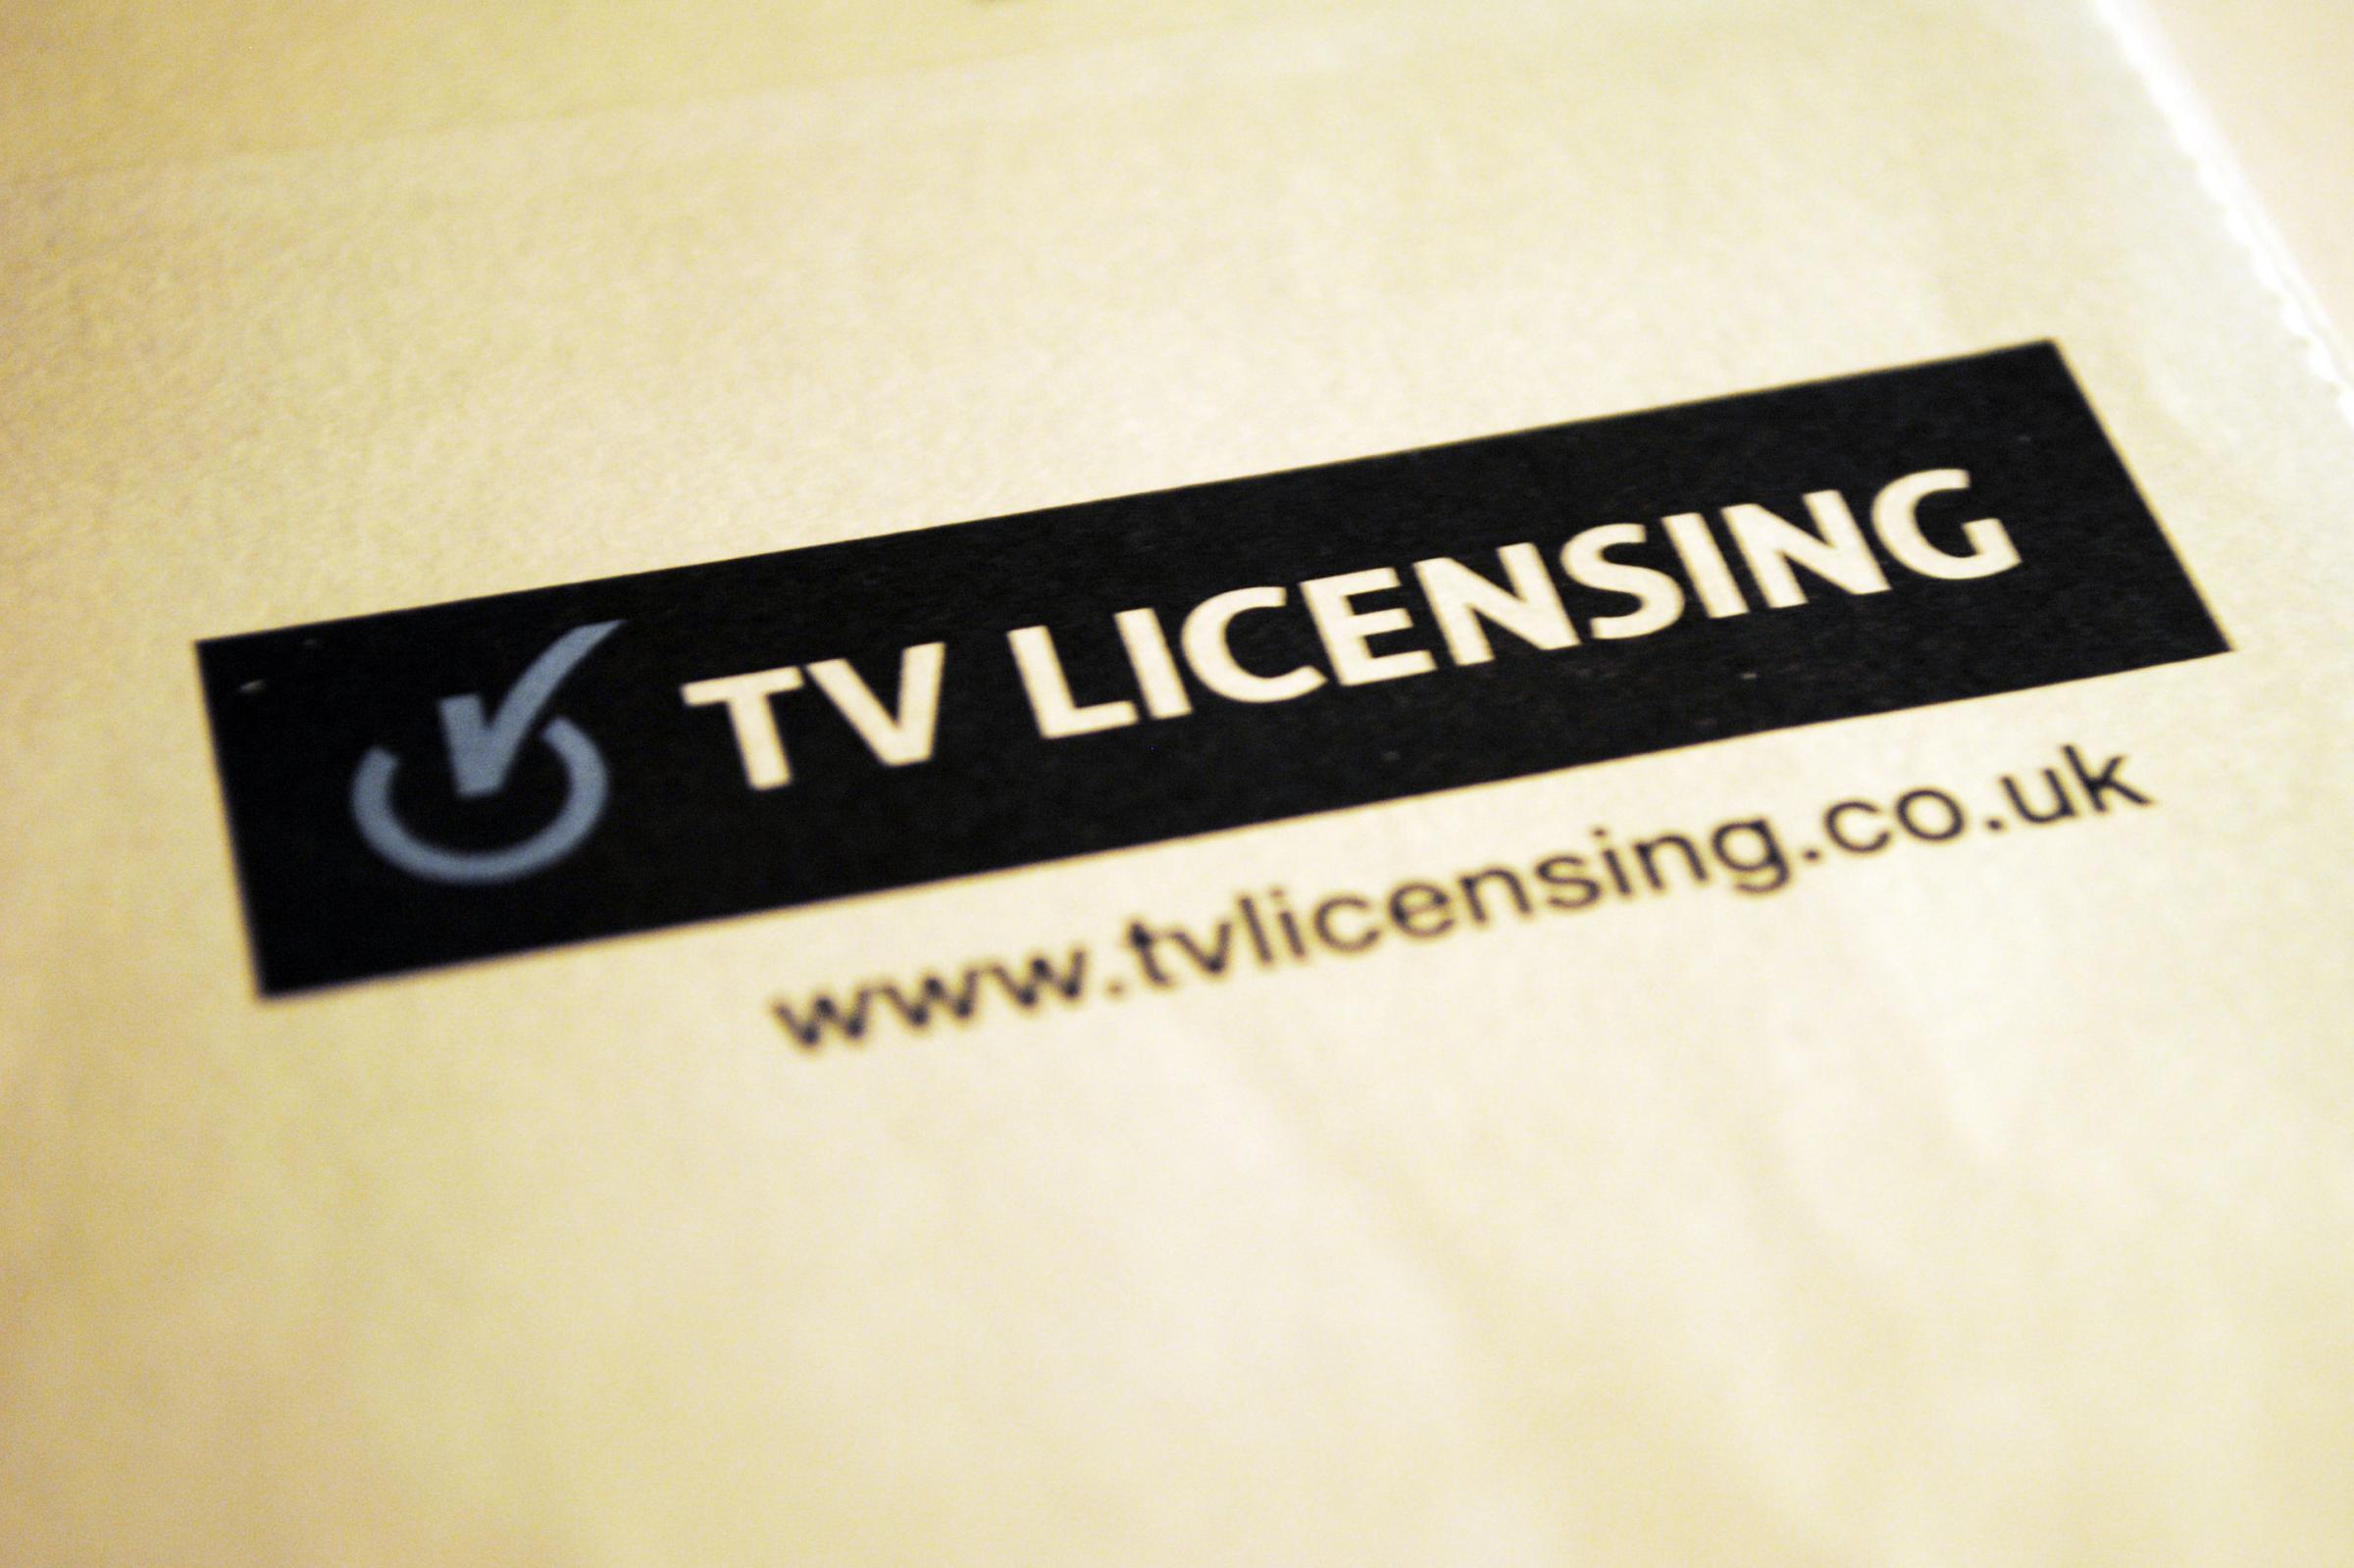 TV Licensing warns residents in East Lancashire about scam emails